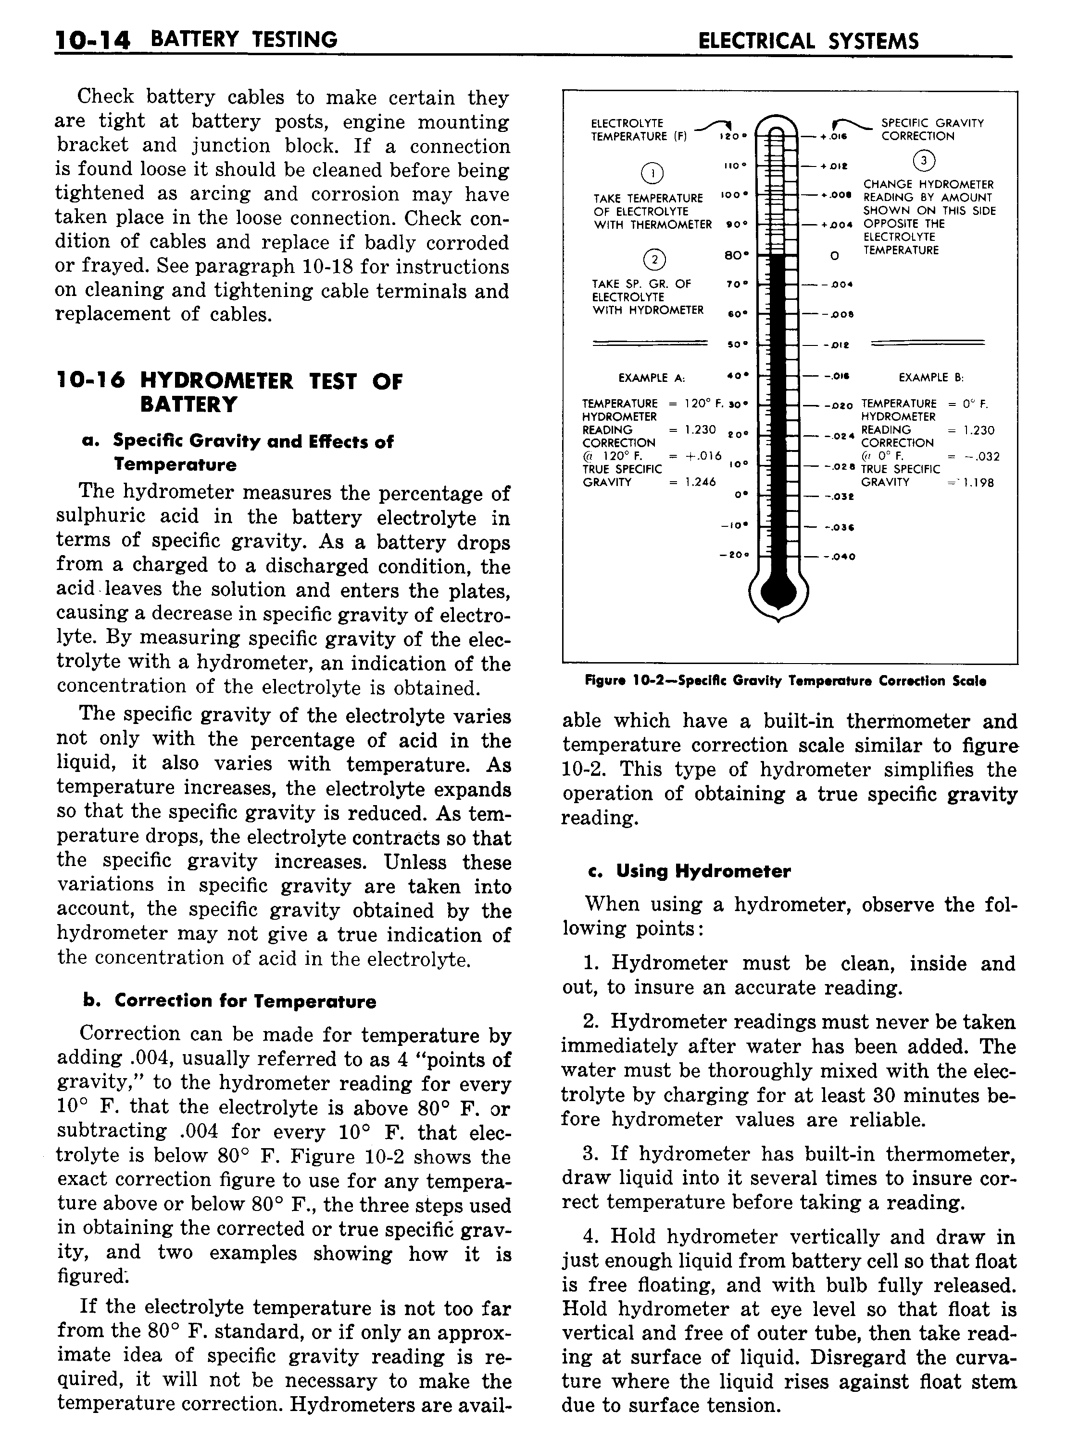 n_11 1960 Buick Shop Manual - Electrical Systems-014-014.jpg